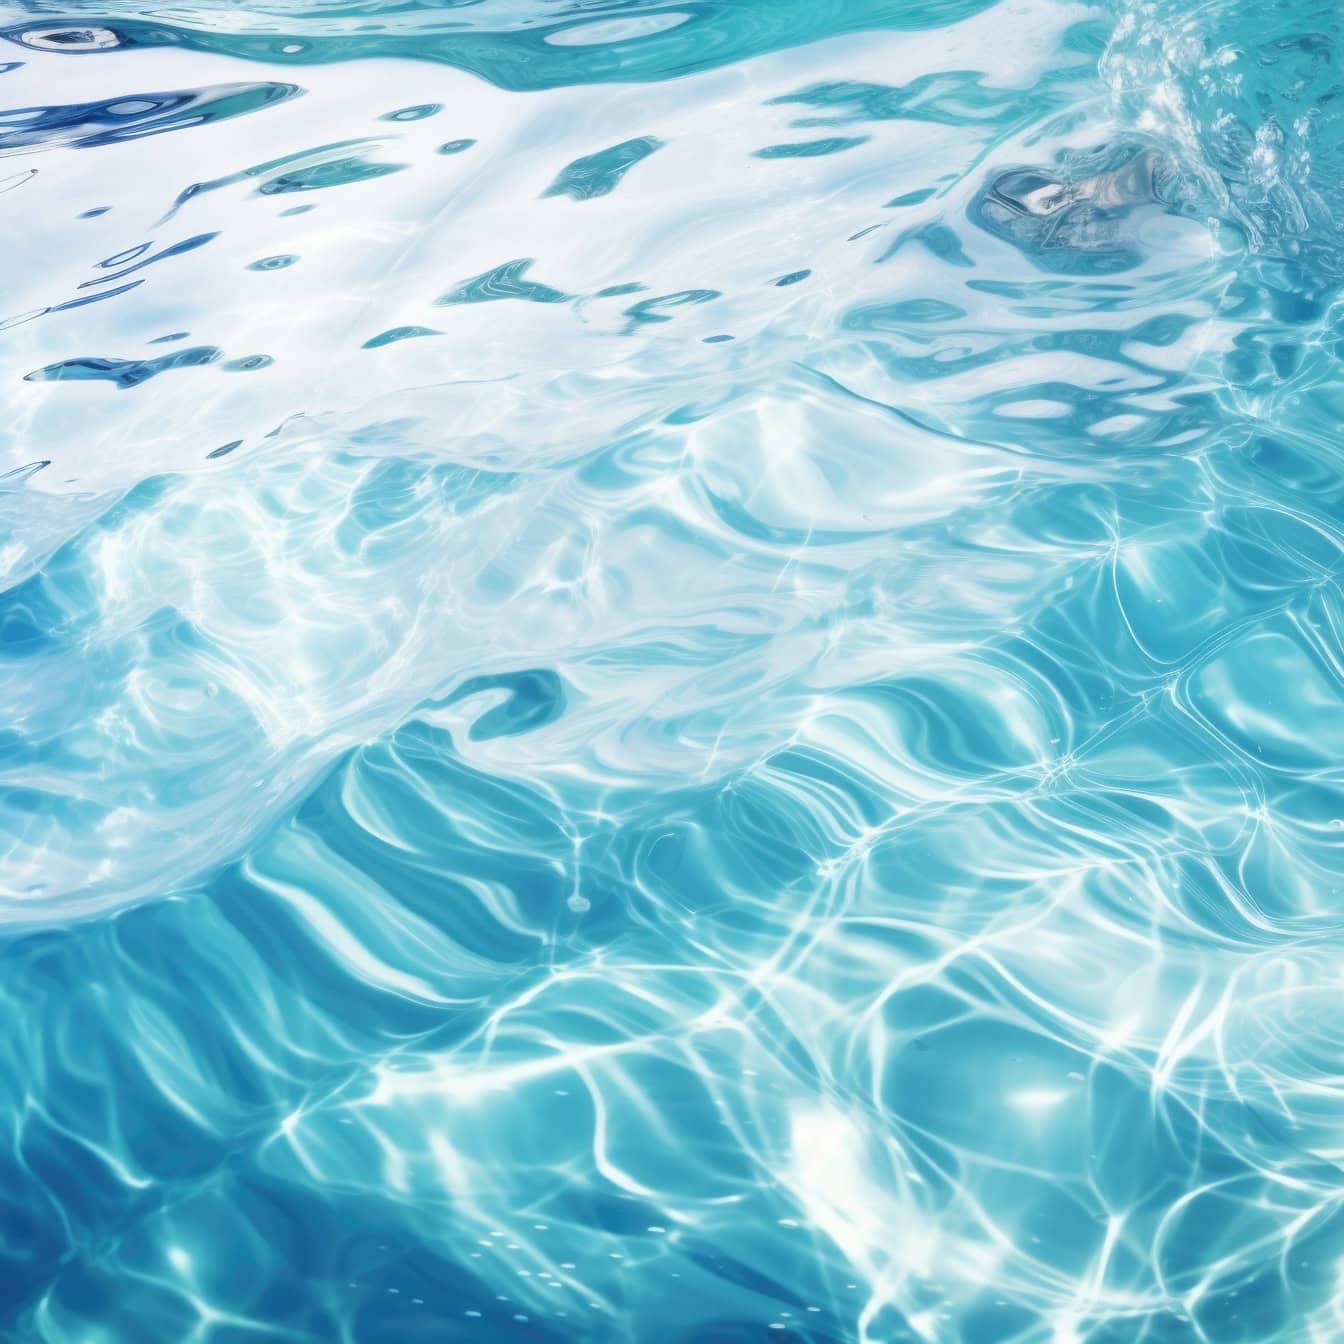 Splashes of waves on surface of clear turquoise-blue marine water